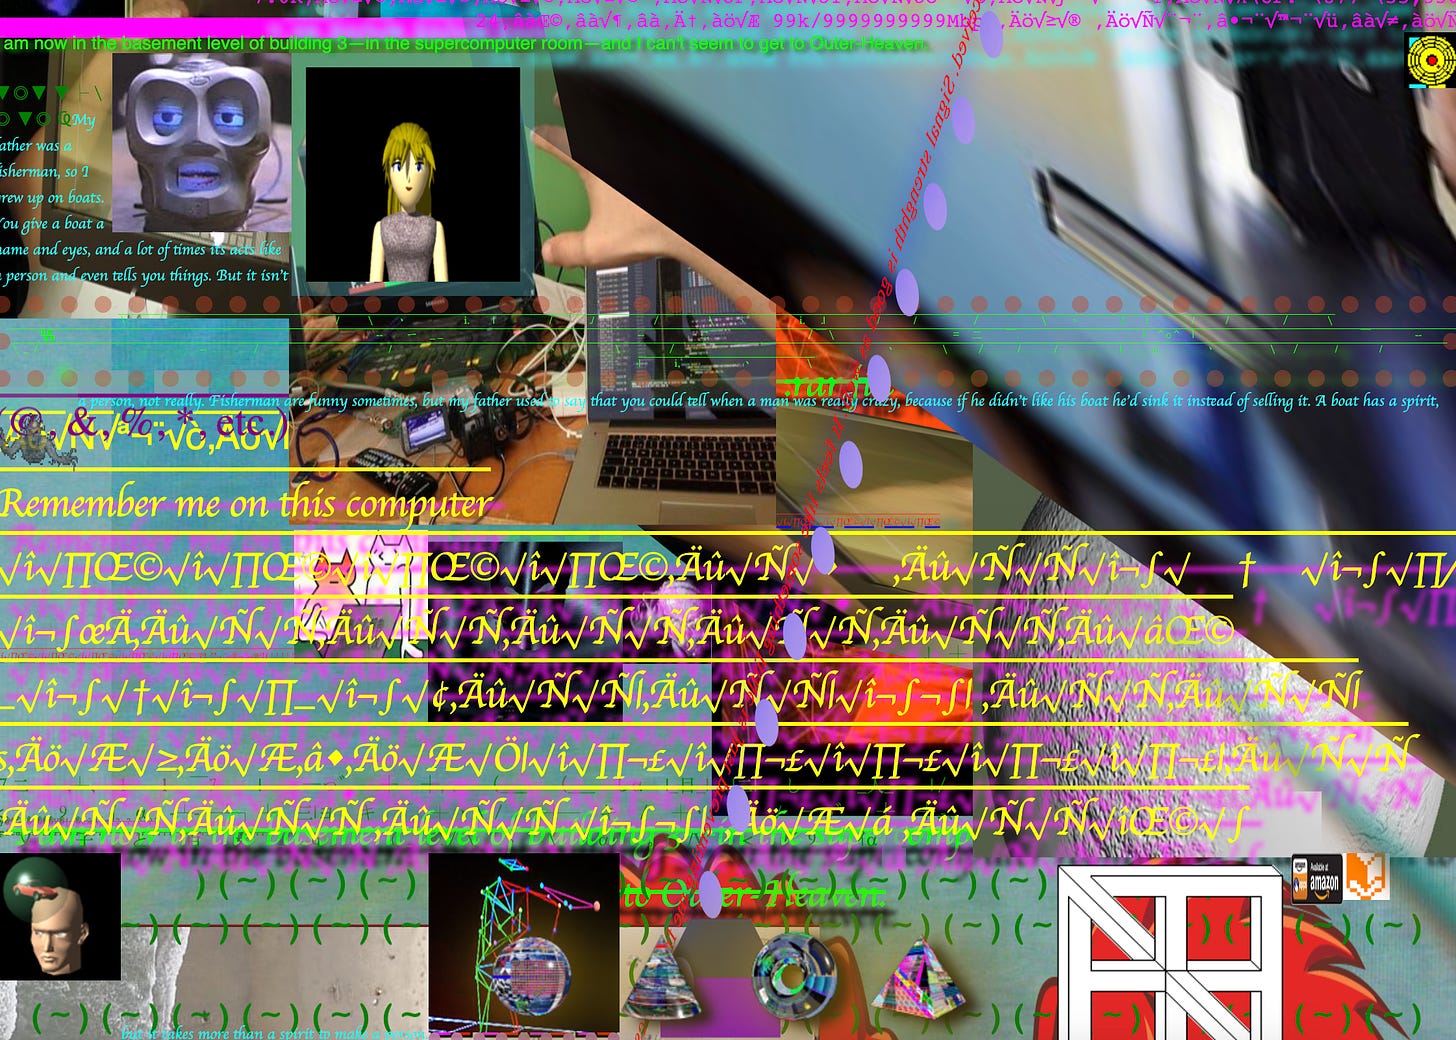 a chaotic webpage with a lot of overlapping elements, including random text, techy images, 3d models of people, and strange geometric shapes